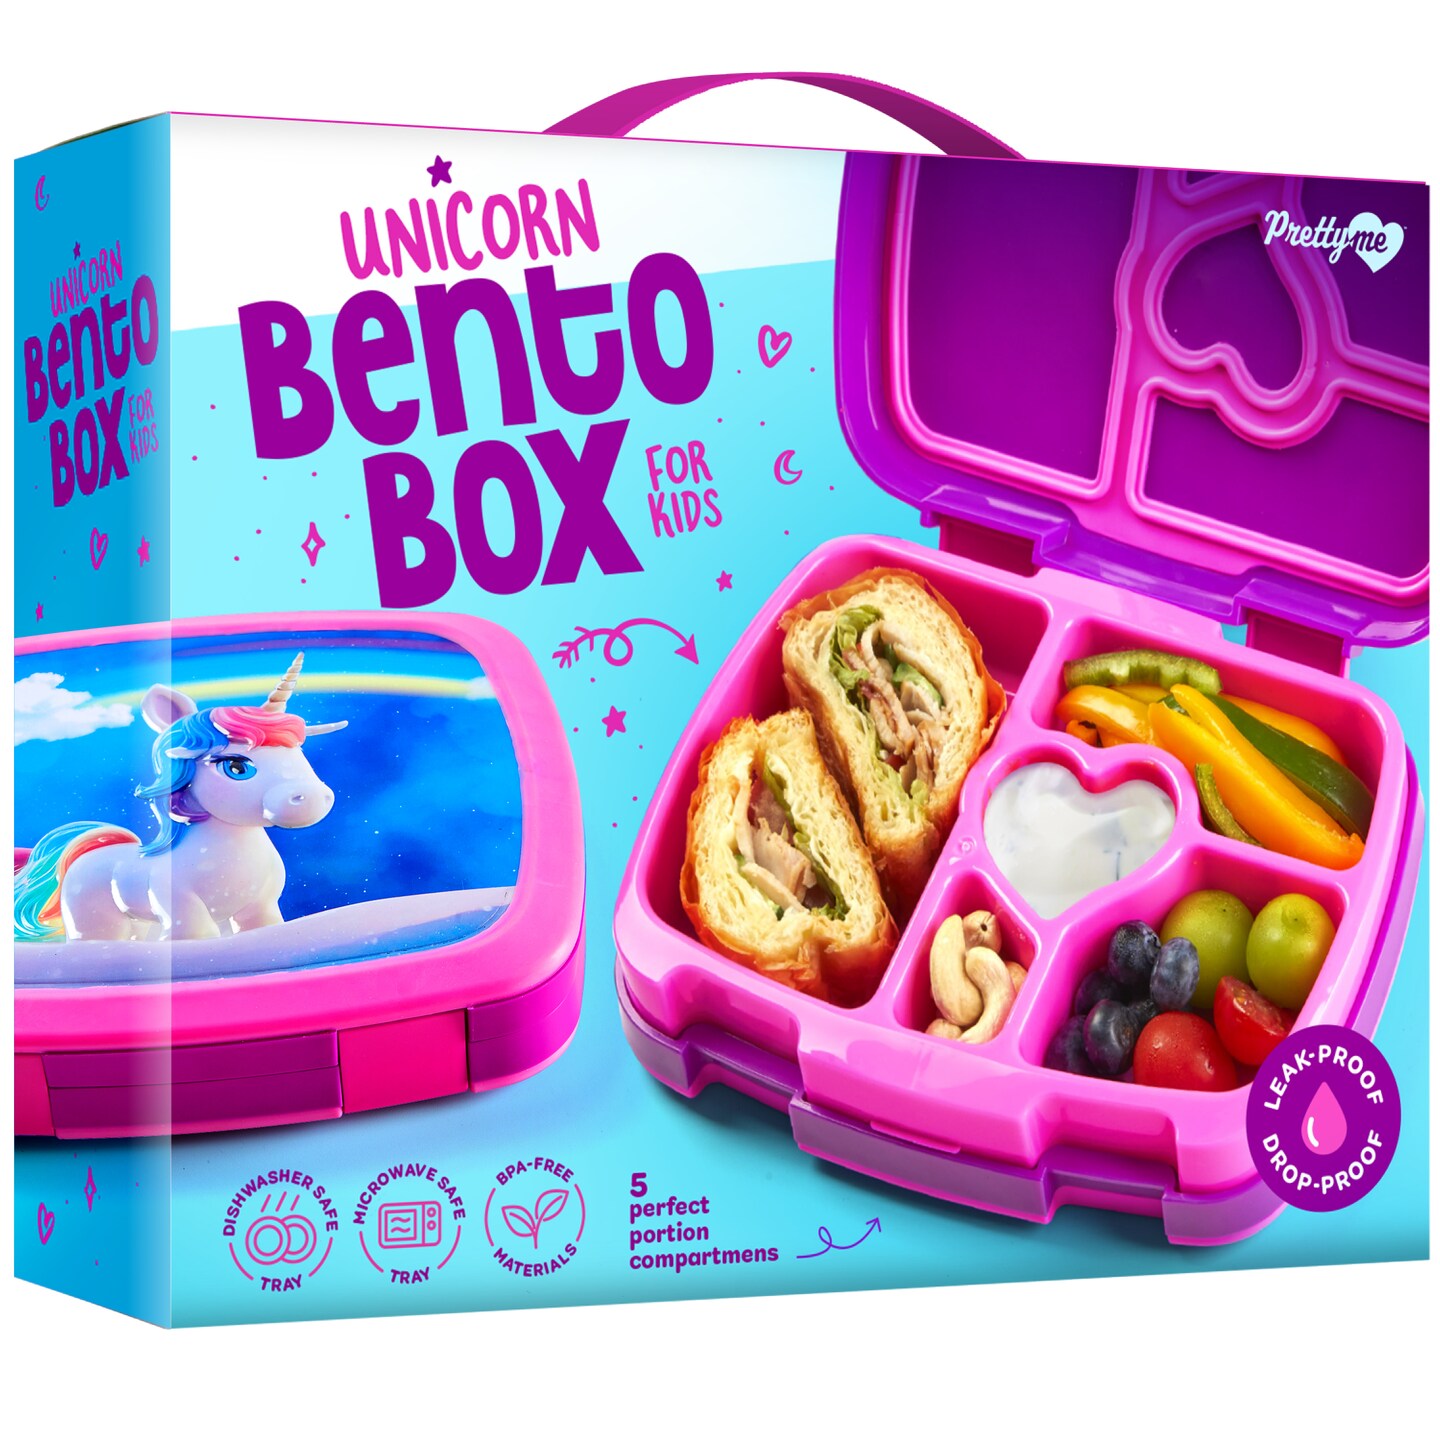 Pretty Me Unicorn Bento Box for Kids - Lunch Box for Girls - School Snack - Gifts for Girl 3-8 Year Old - Containers, Boxes, Christmas Gift,